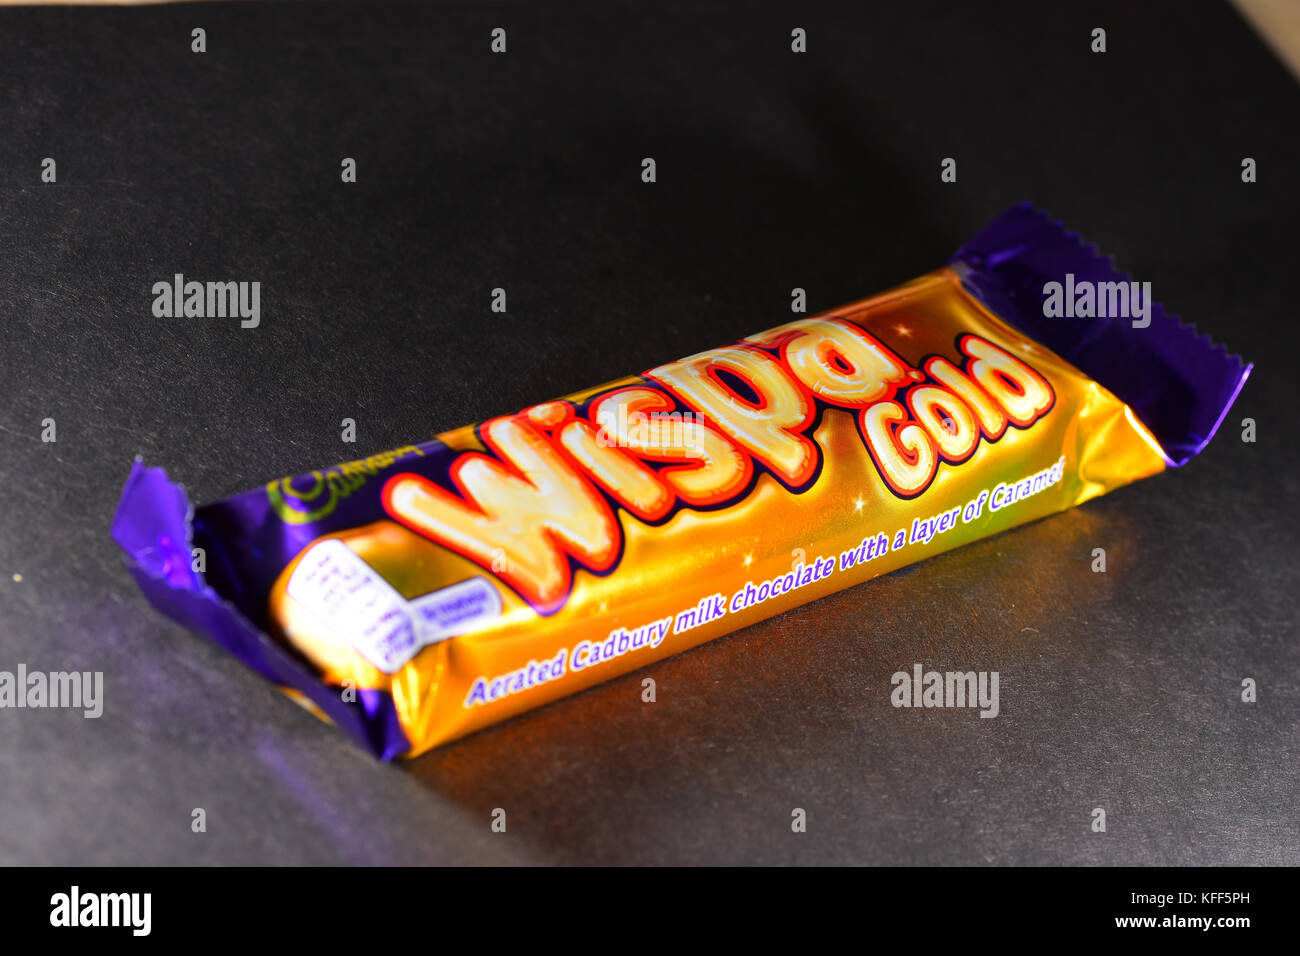 Cadbury Invites Twitter Users To Invest In Limited-edition Wispa Bar